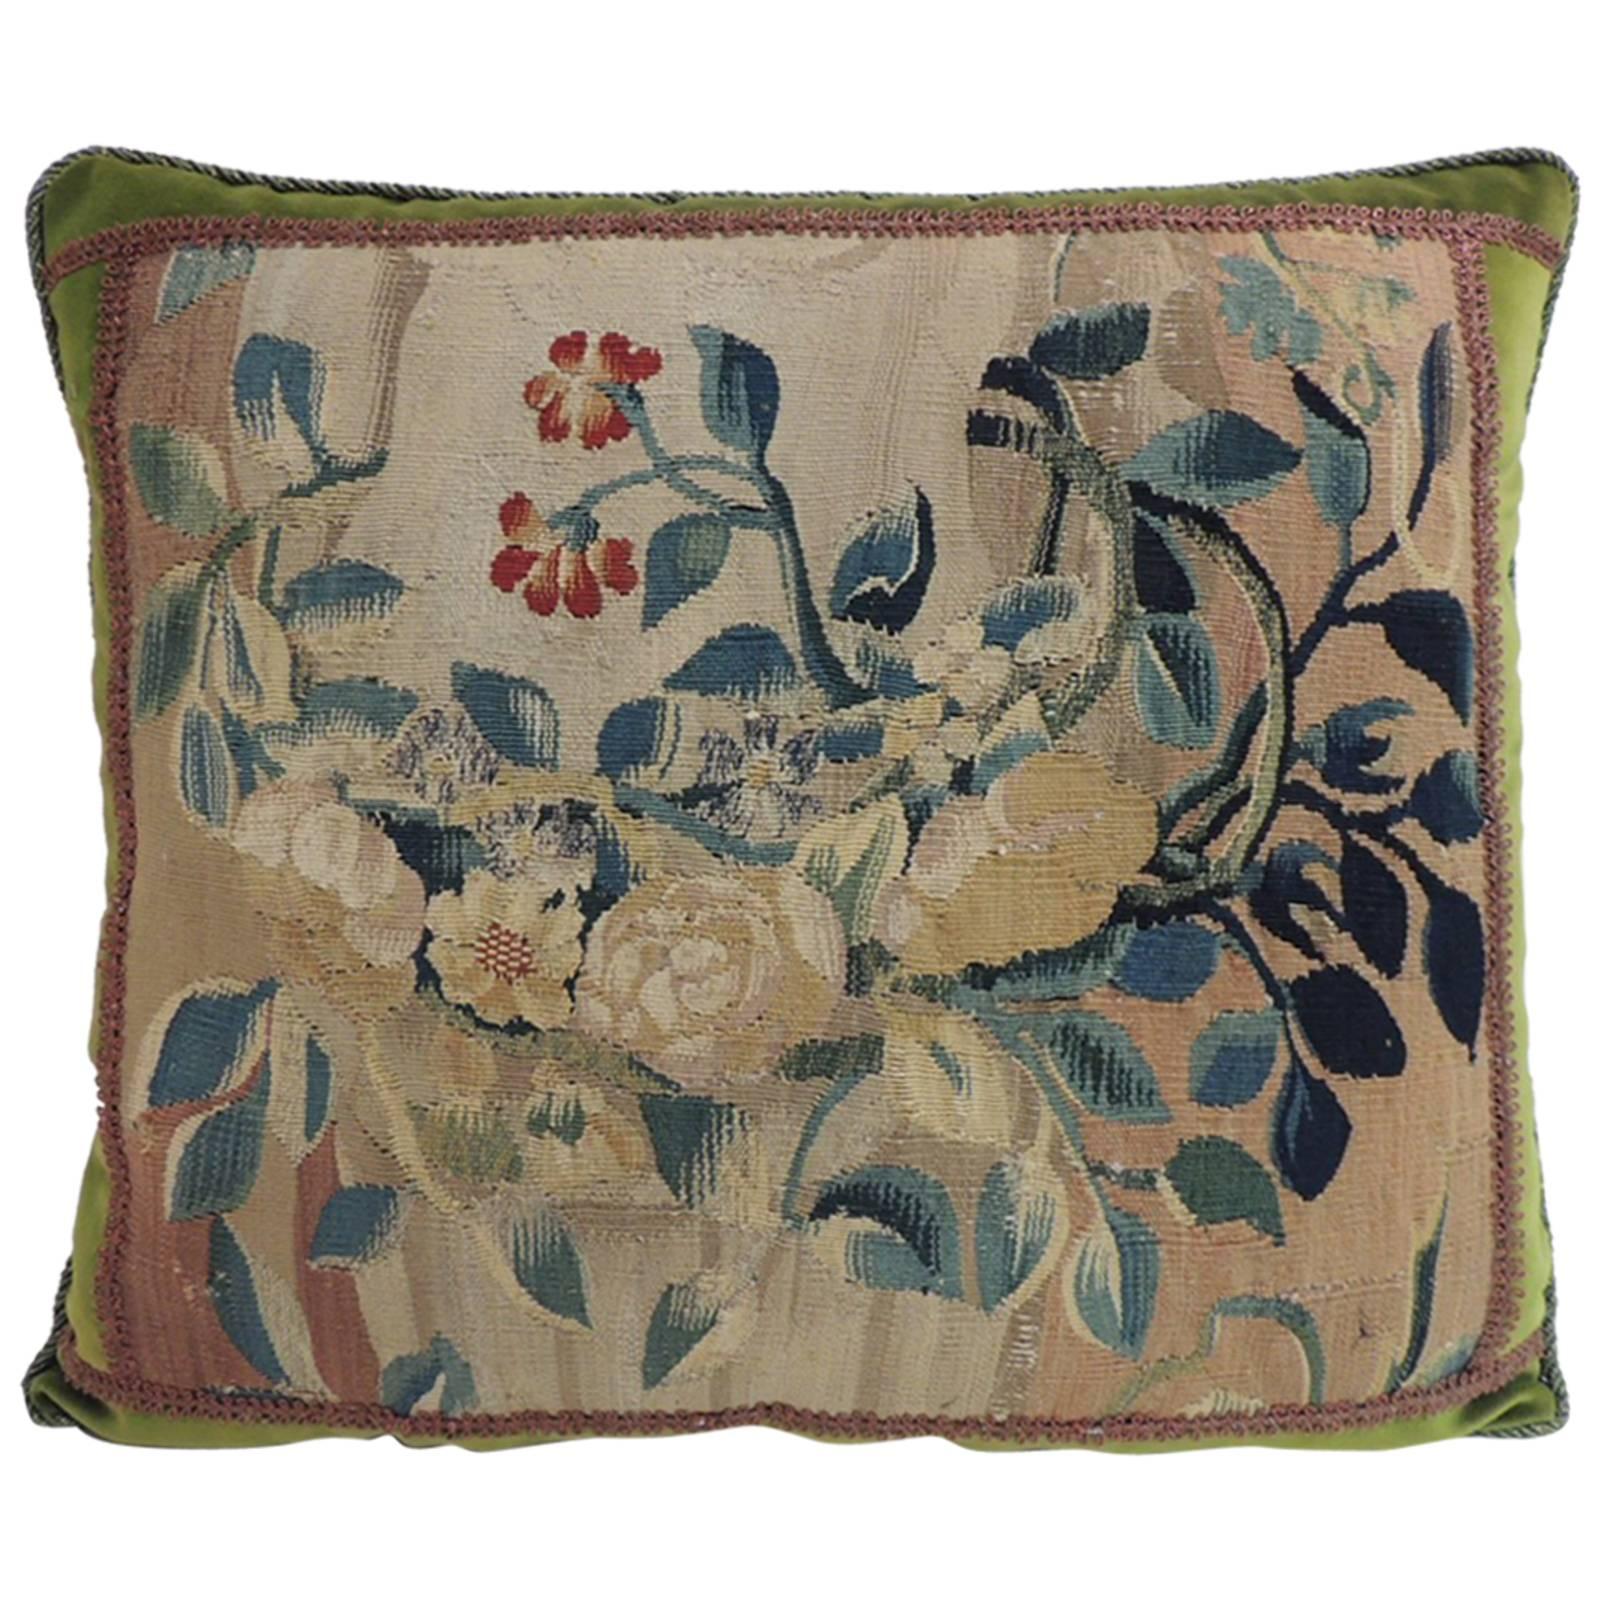 18th Century Aubusson Tapestry Square Decorative Pillow